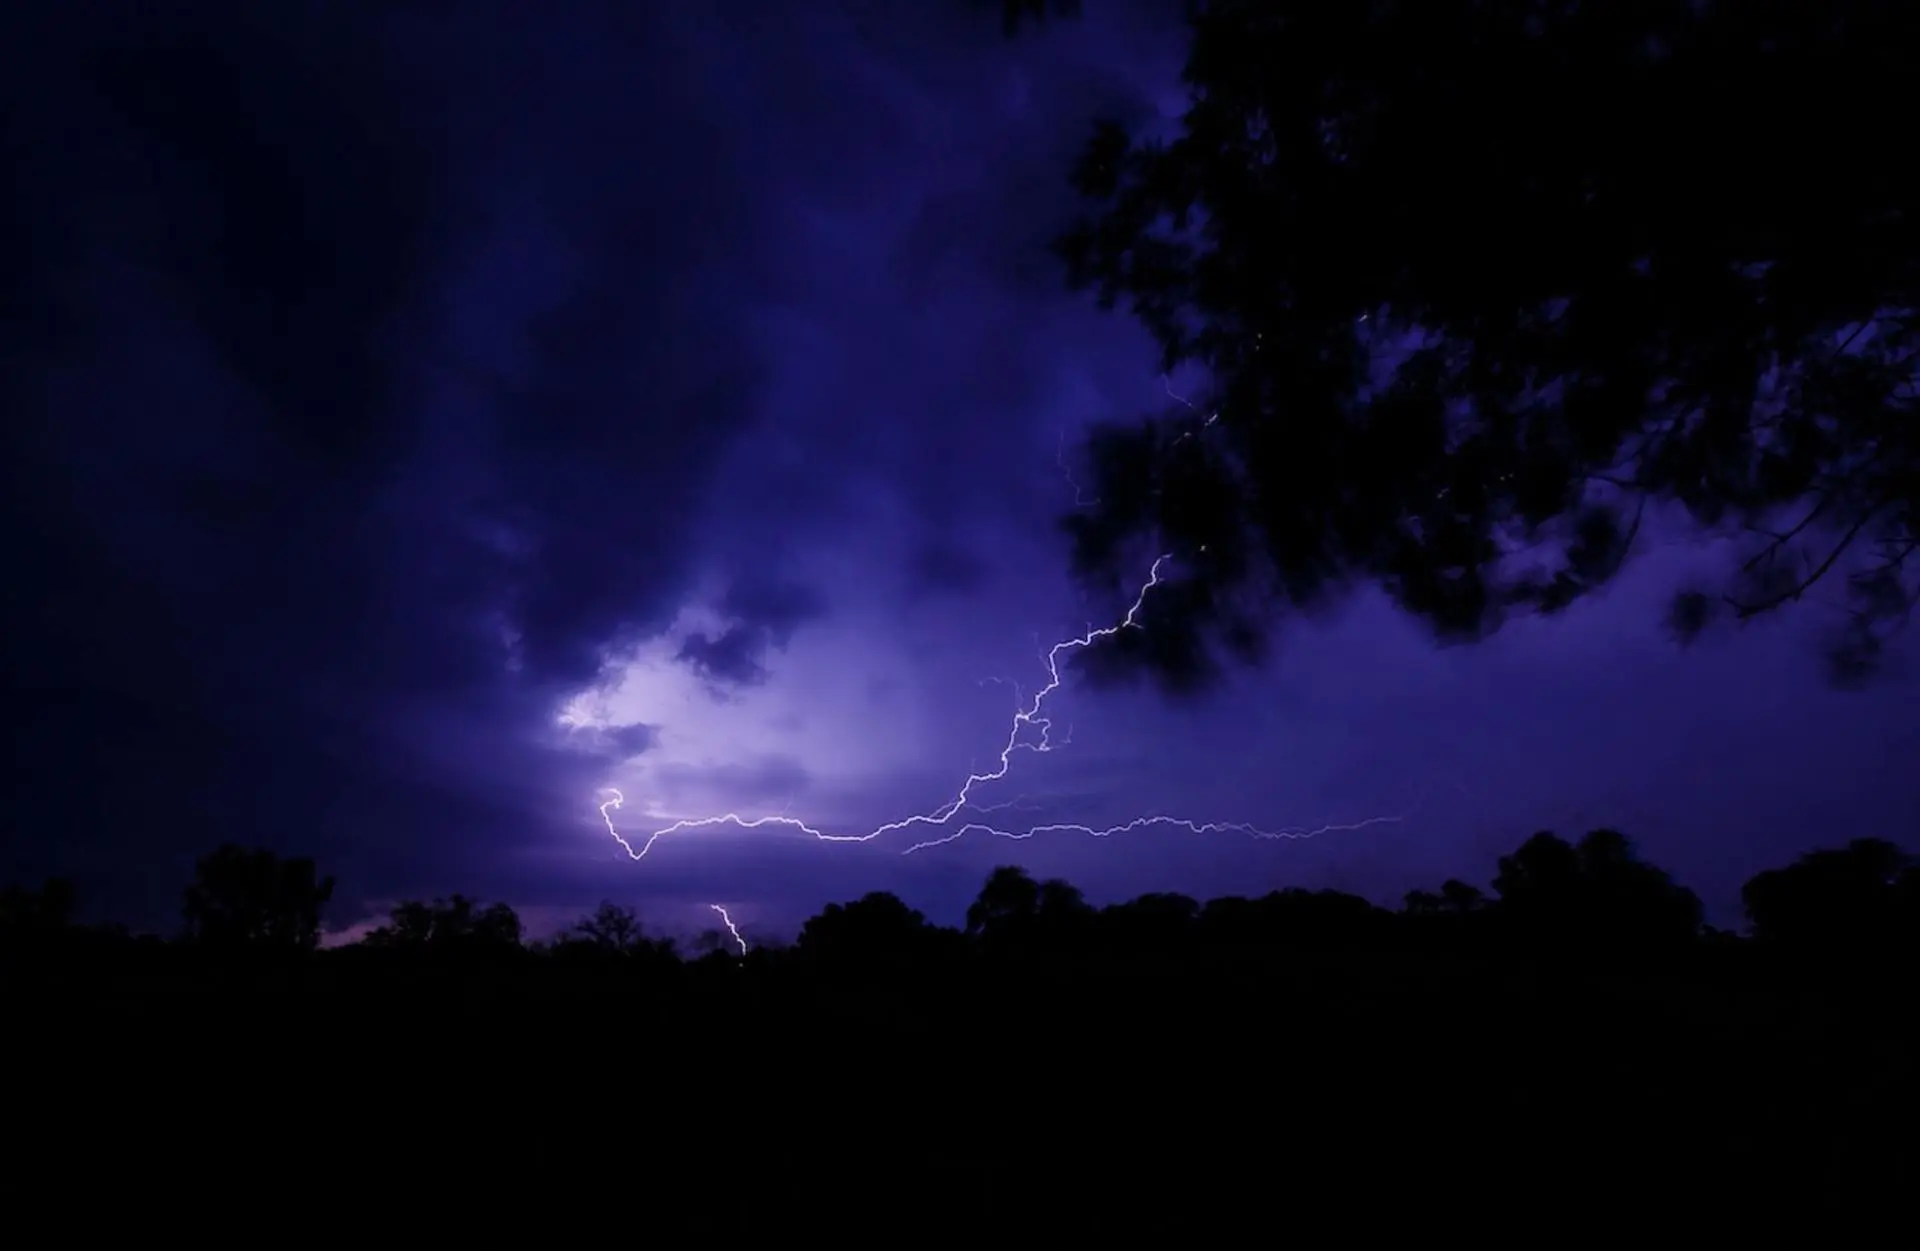 Why nocturnal thunderstorms can be particularly dangerous